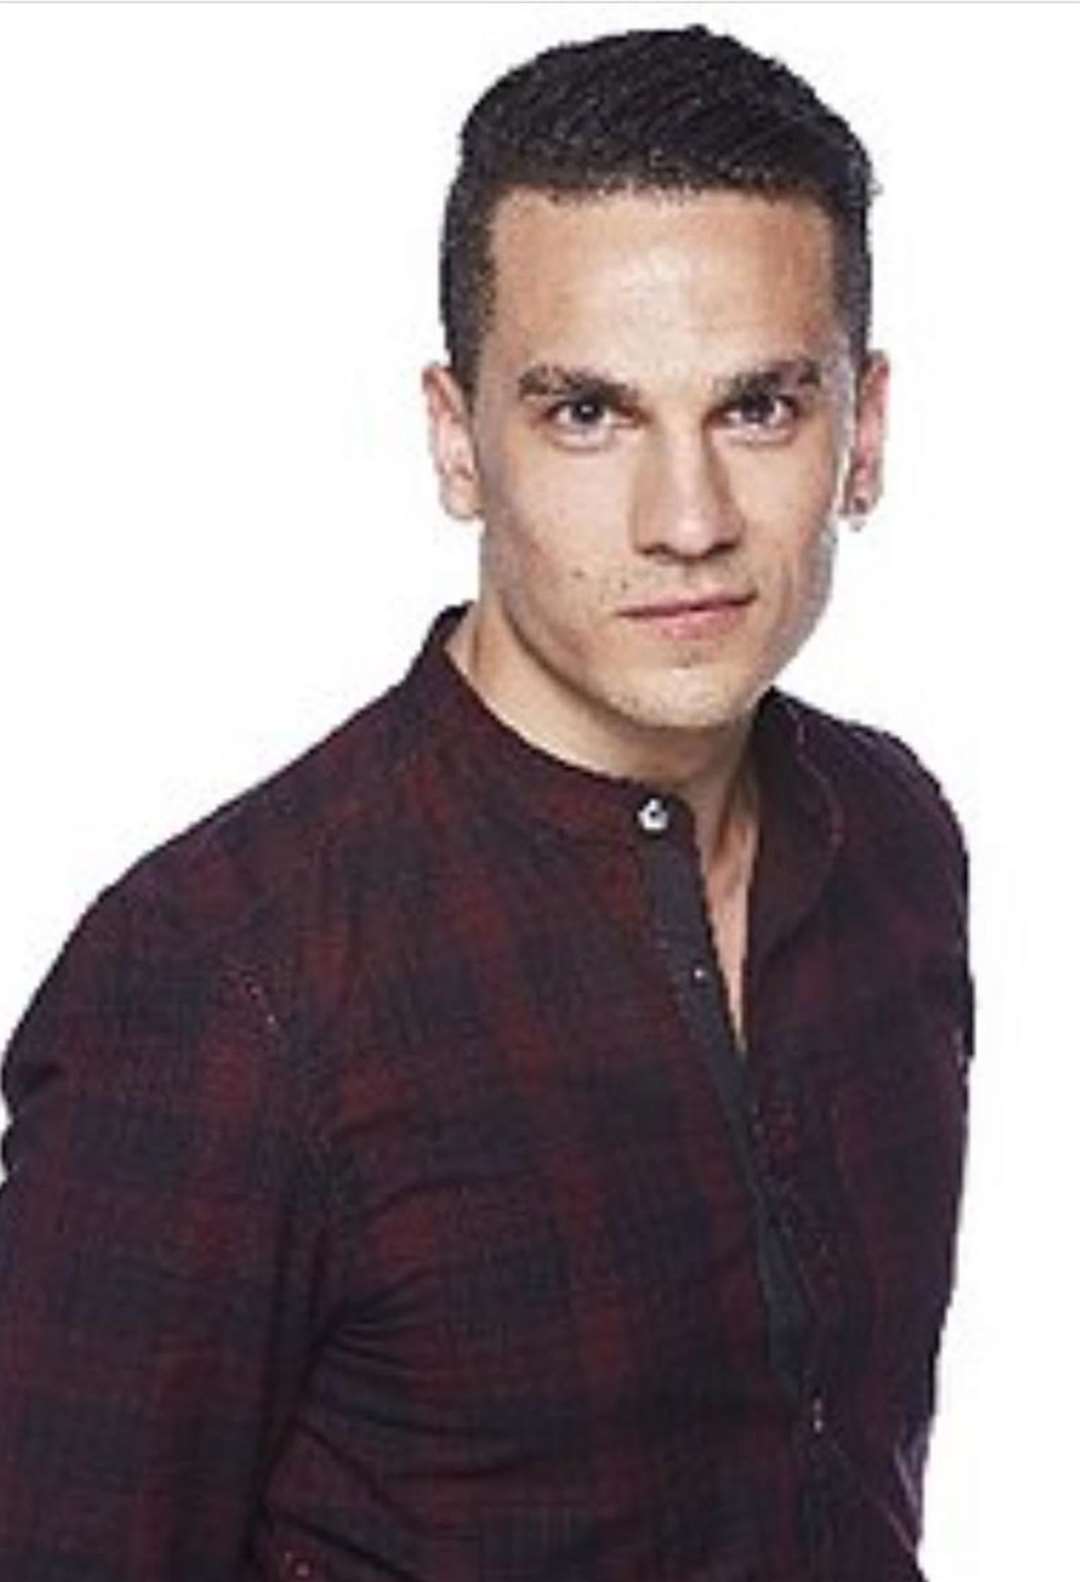 EastEnders actor Aaron Sidwell is in the West End Jerseys (8039463)